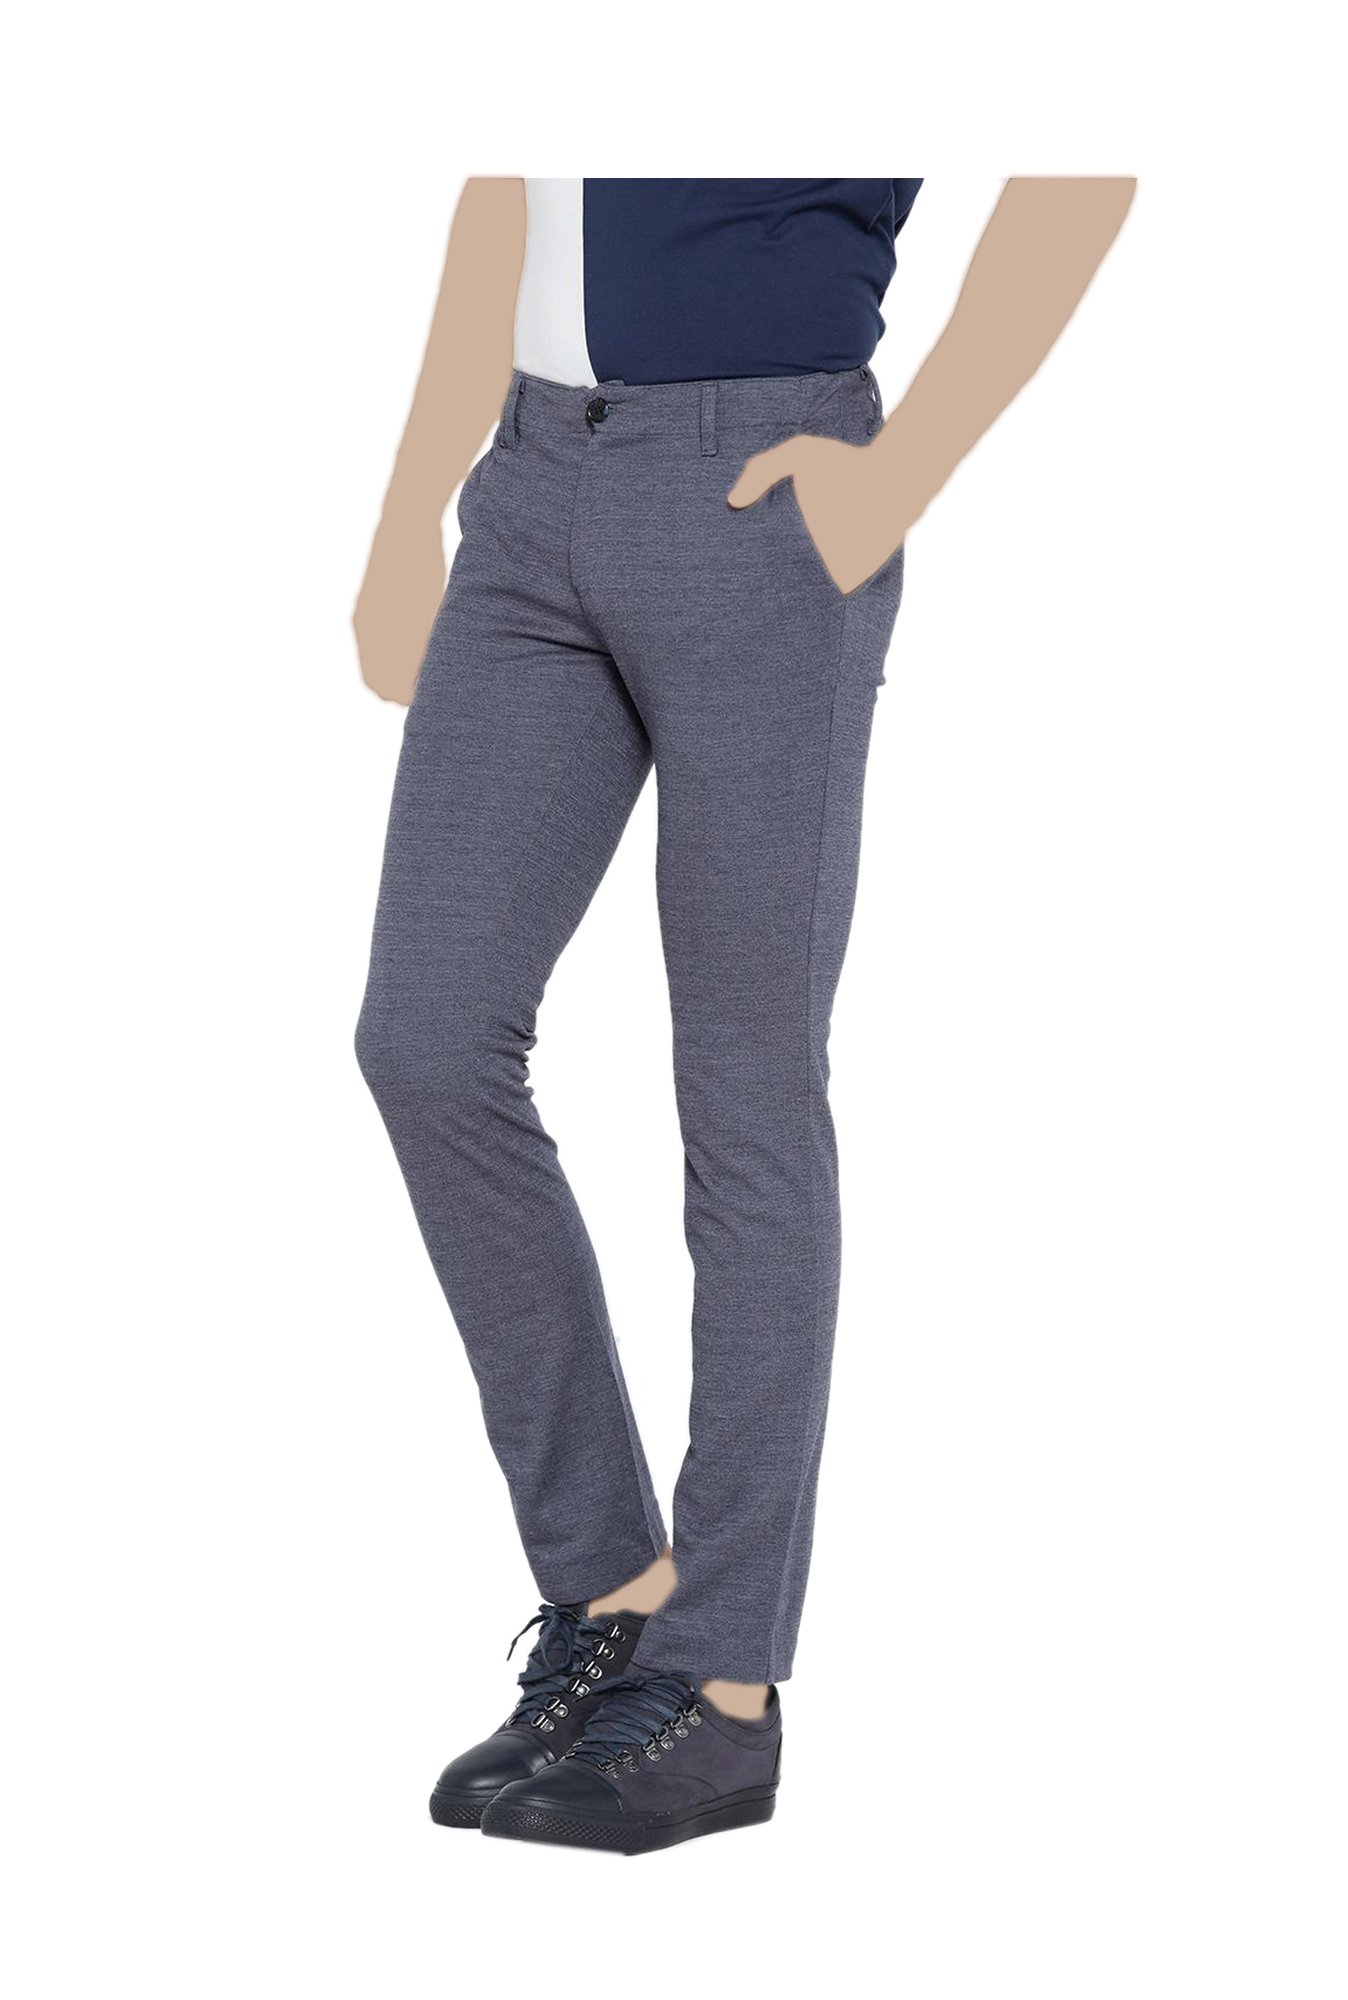 United Colors Of Benetton Trousers  Buy United Colors Of Benetton Cotton  Blend Solid Regular Length Boys Trousers Online  Nykaa Fashion